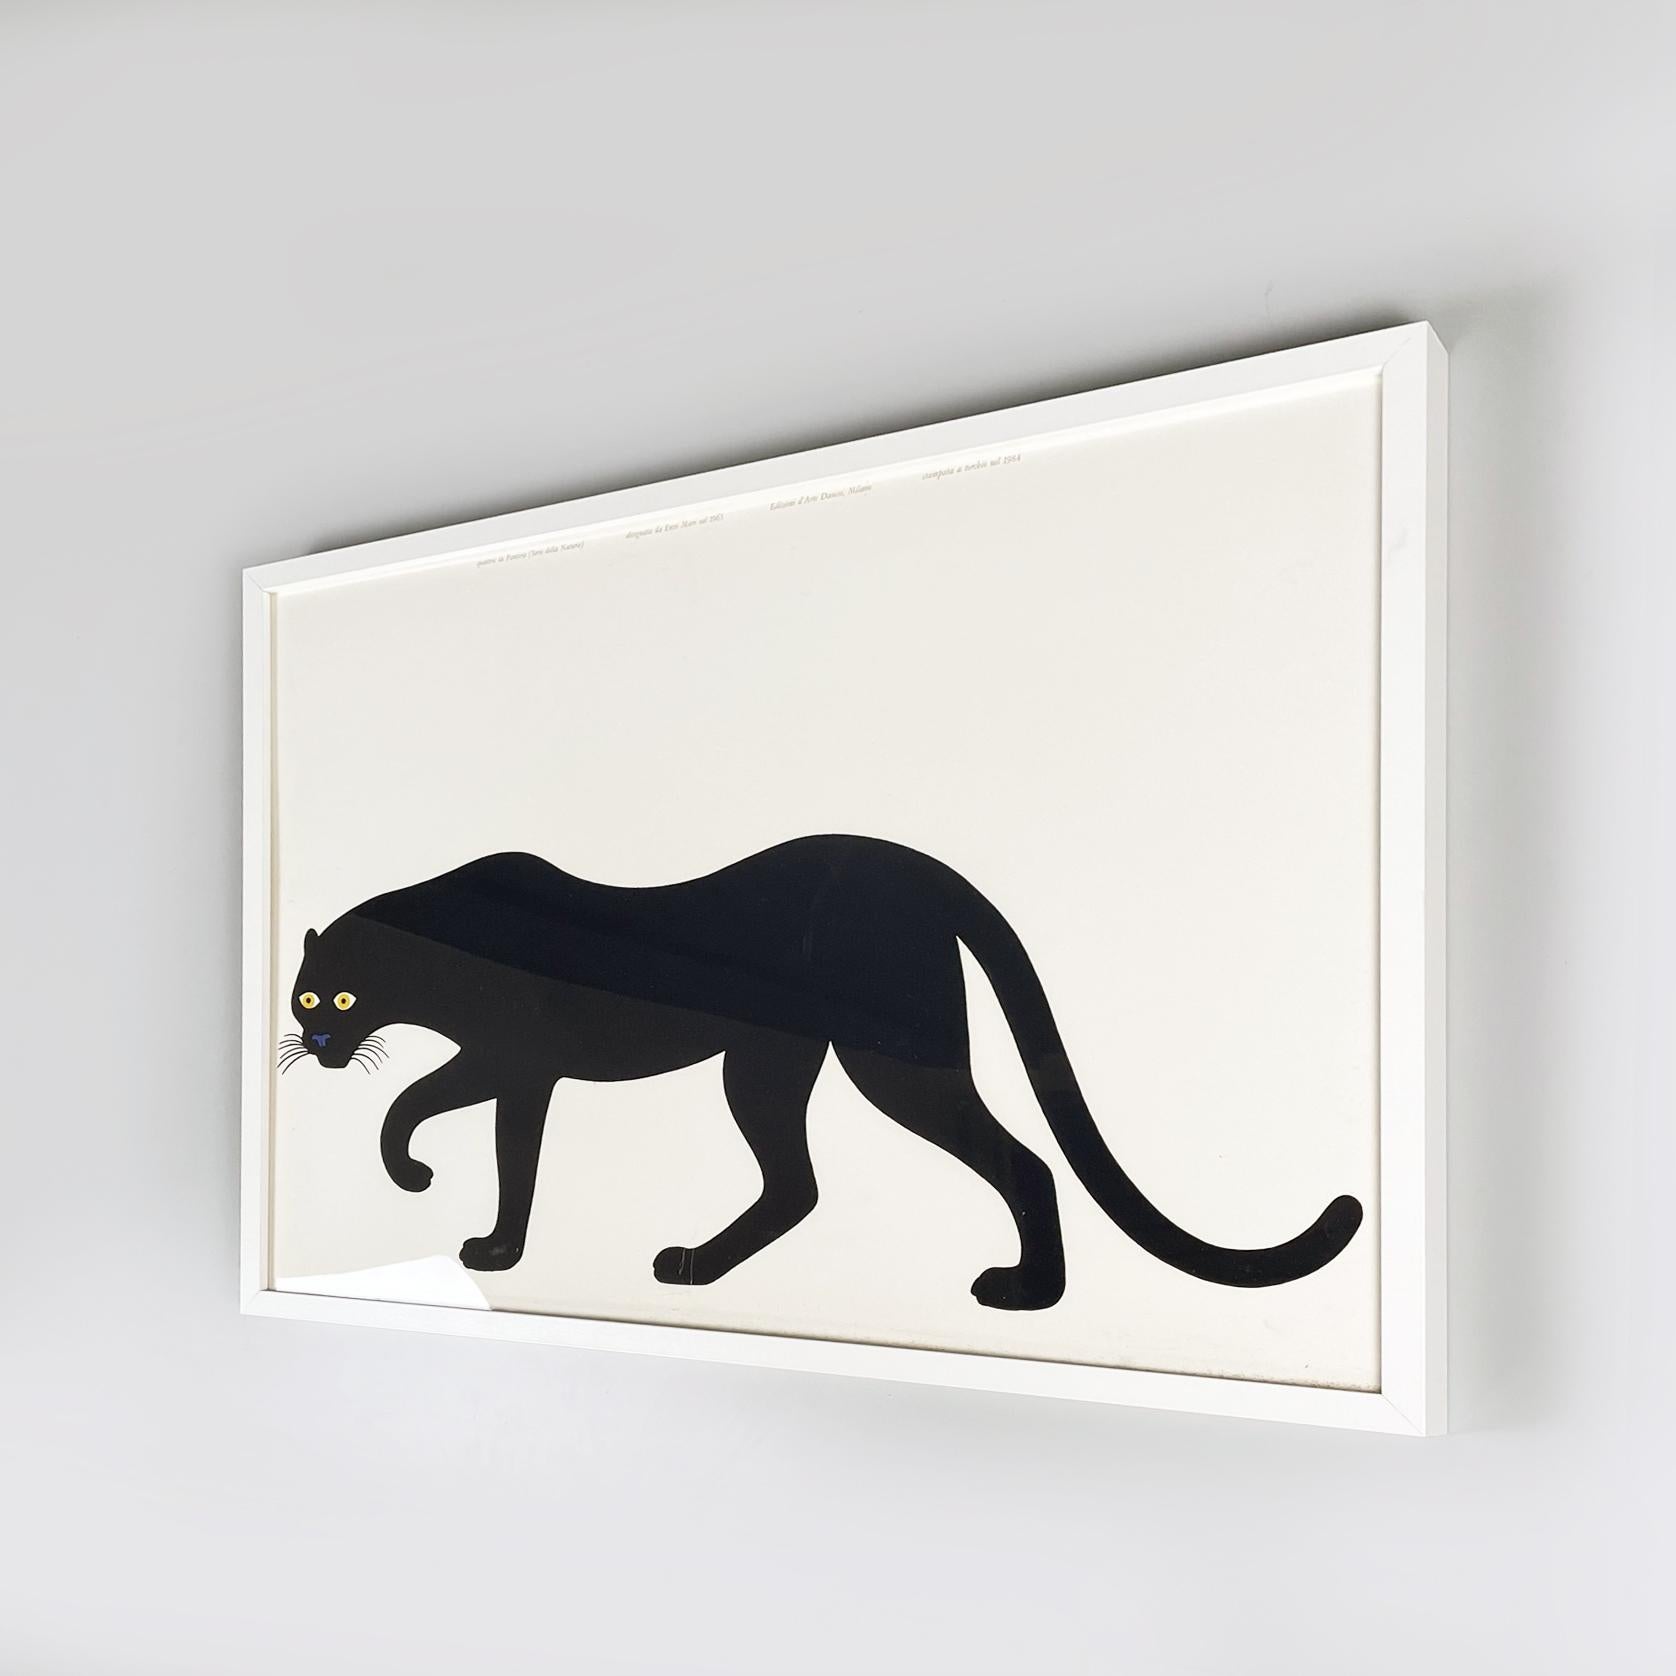 Italian modern Press-print la Pantera by Enzo Mari, 1984
Print named la Pantera (the panther) from the Natura series on white paper. The painting represent the silhouette of a black panther in profile view, with yellow eyes and blue nose. In white